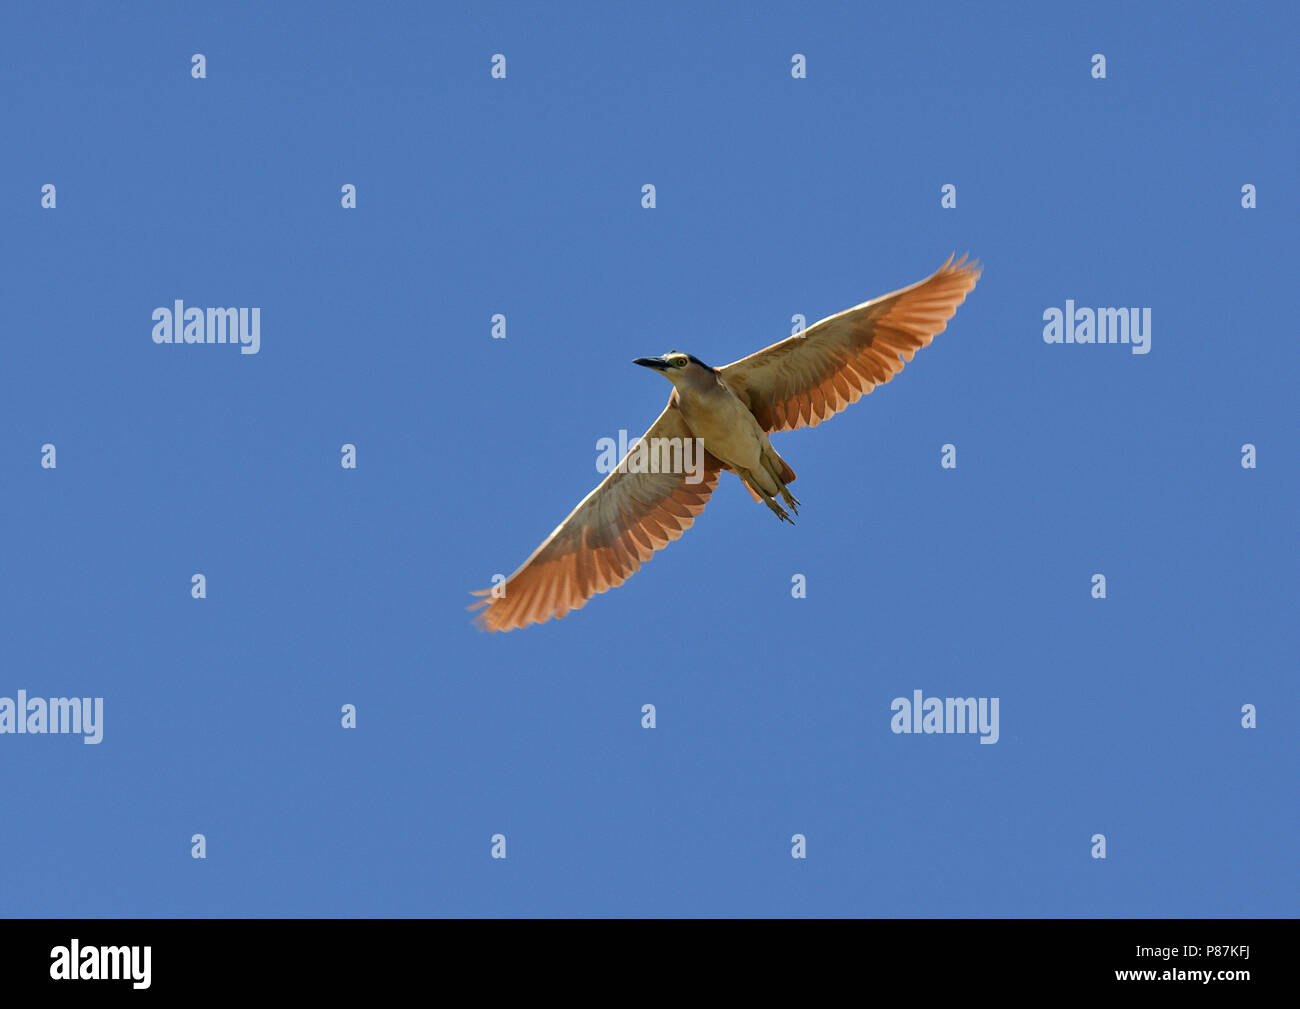 Rufous Night Heron (Nycticorax caledonicus hilli) in flight against a blue sky. Stock Photo